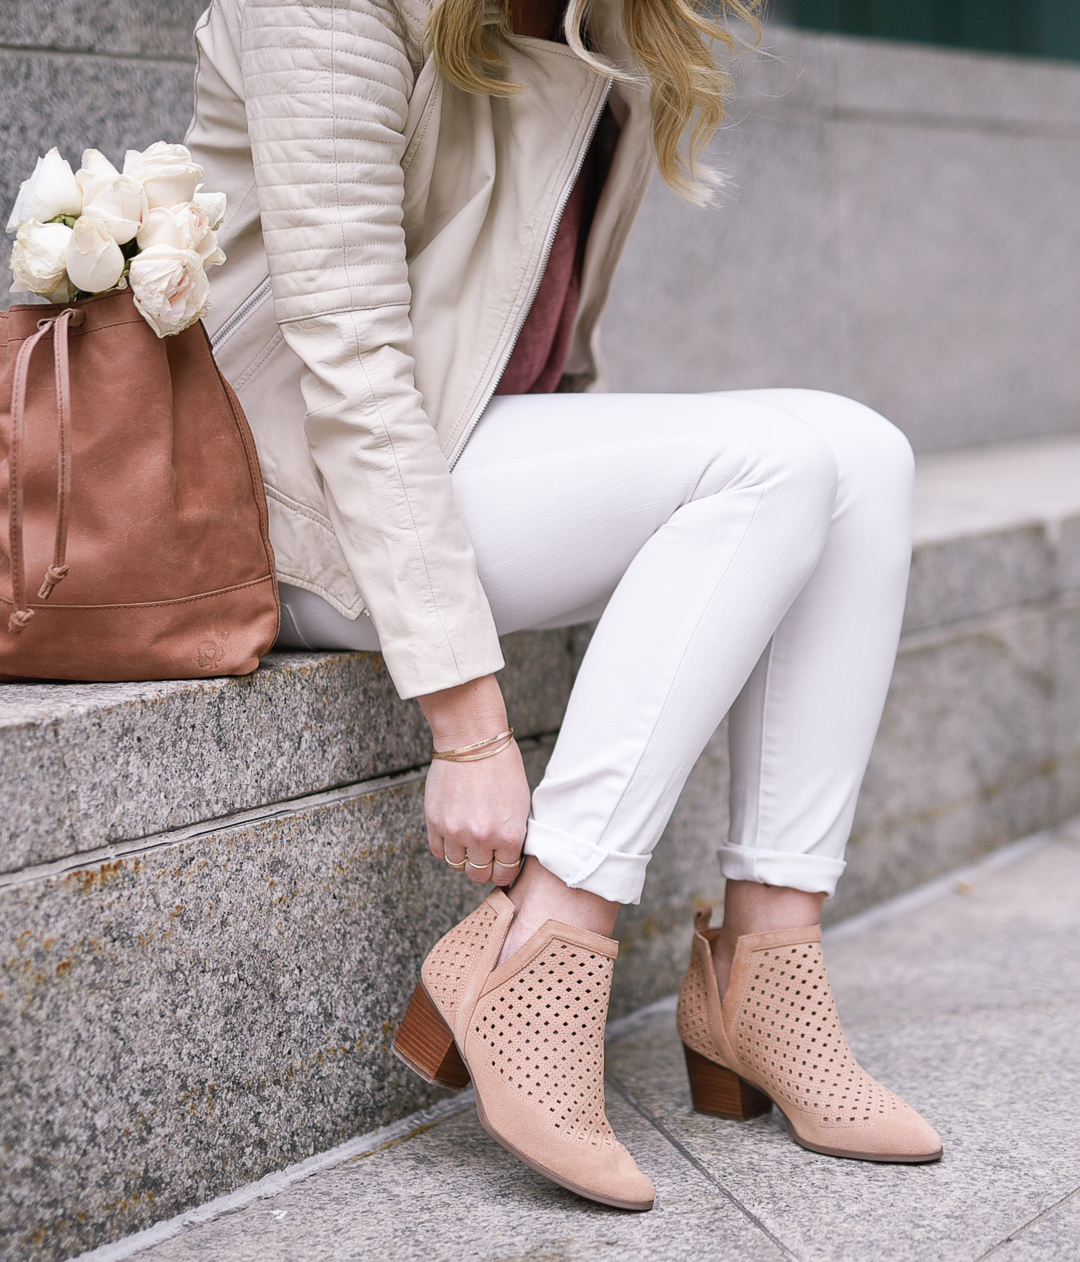 Perforated tan booties by Sole Society. 